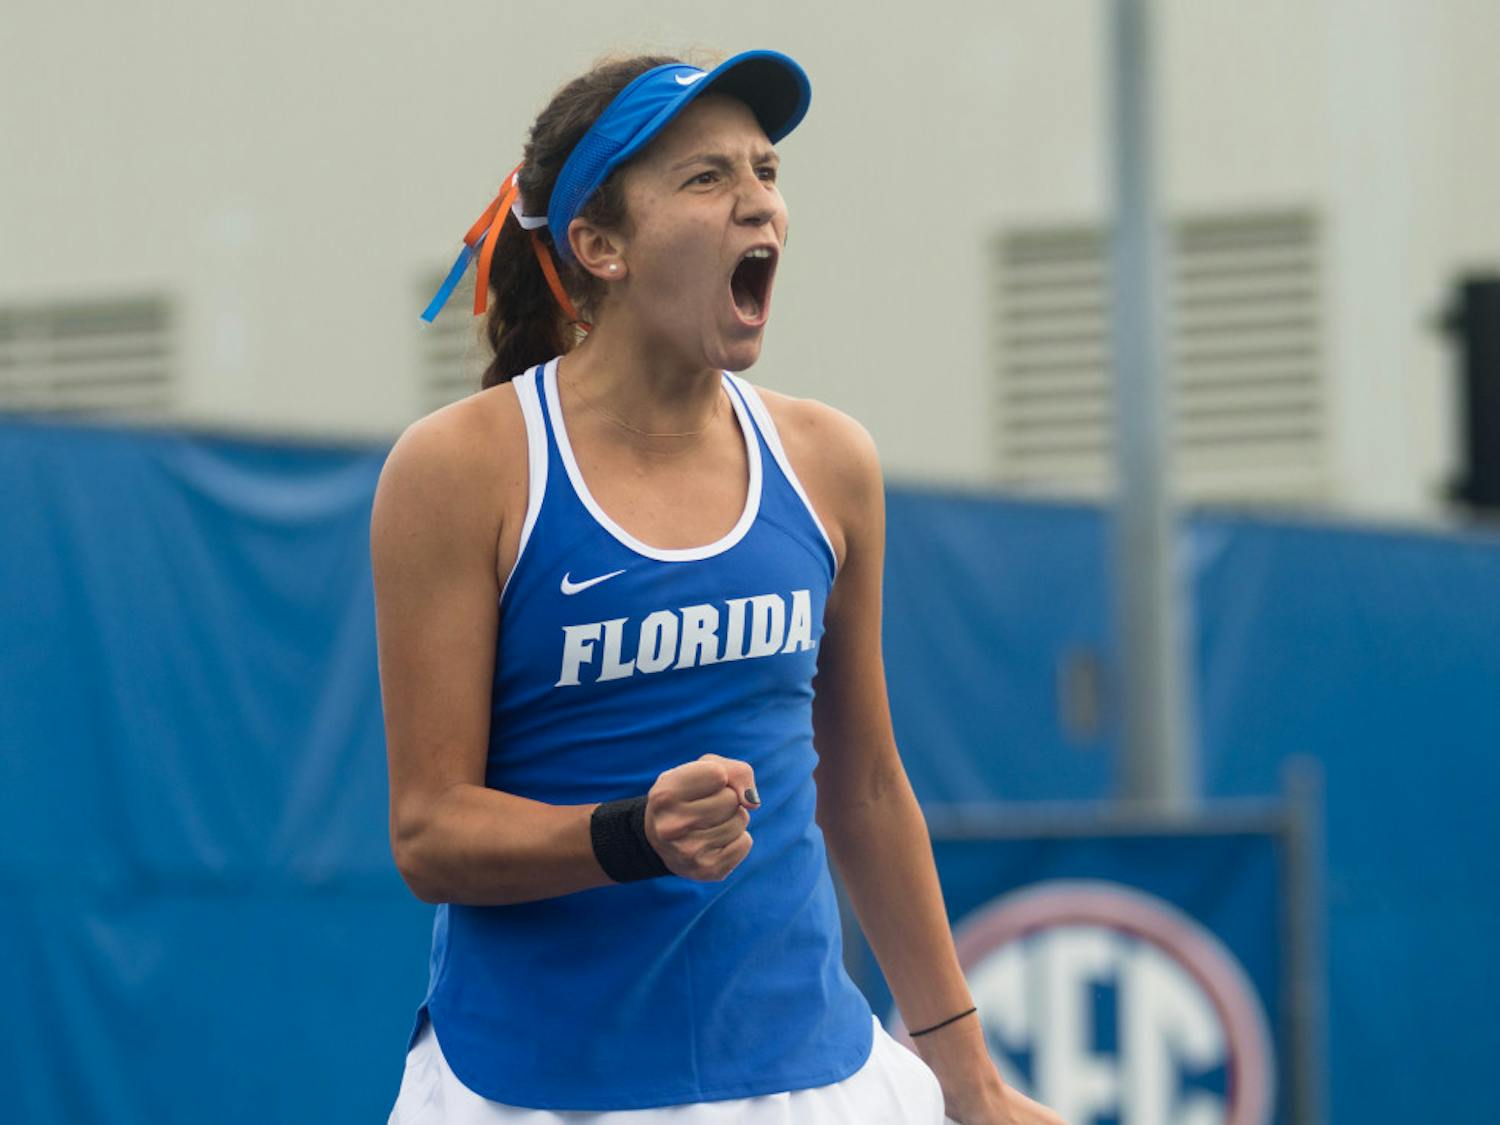 Senior Anna Danilina eked a first set victory, 7-5, but buried her opponent in the second set 6-0 take a first-round singles victory at the NCAA Individual Championships Wednesday. 